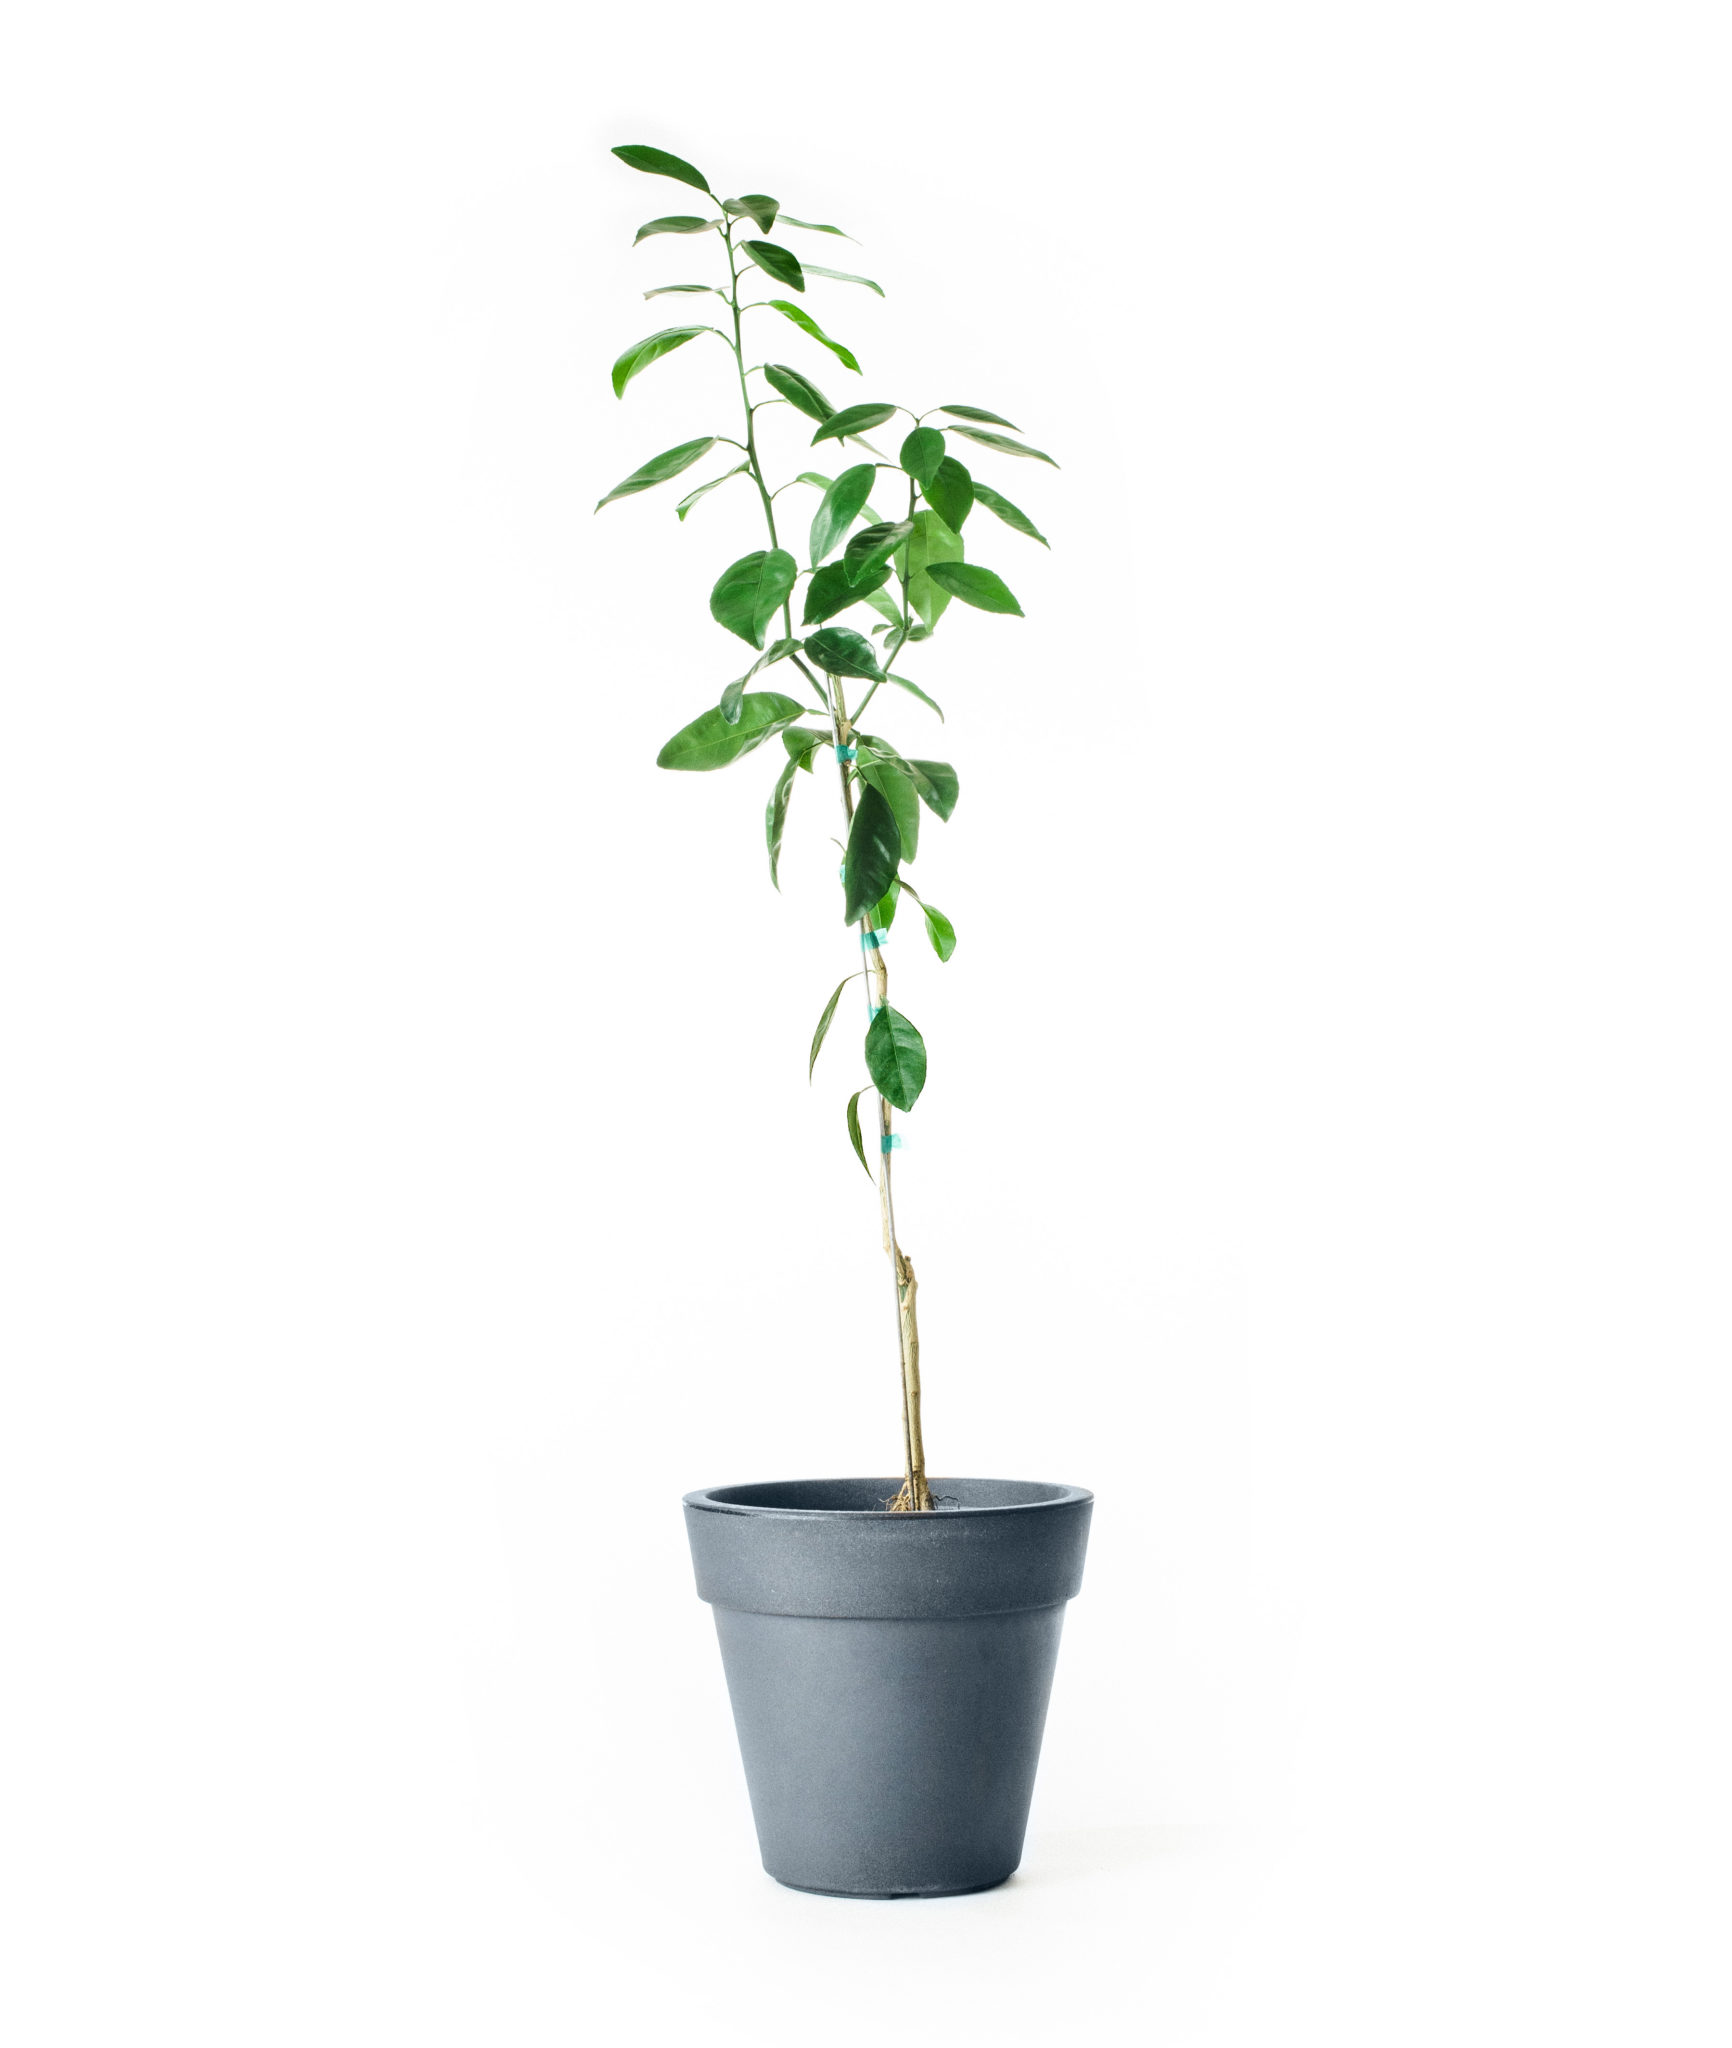 Image of Dwarf Owari Satsuma Tree (Age: 2 - 3 Years Height: 2 - 3 FT Ship Method: Delivery)